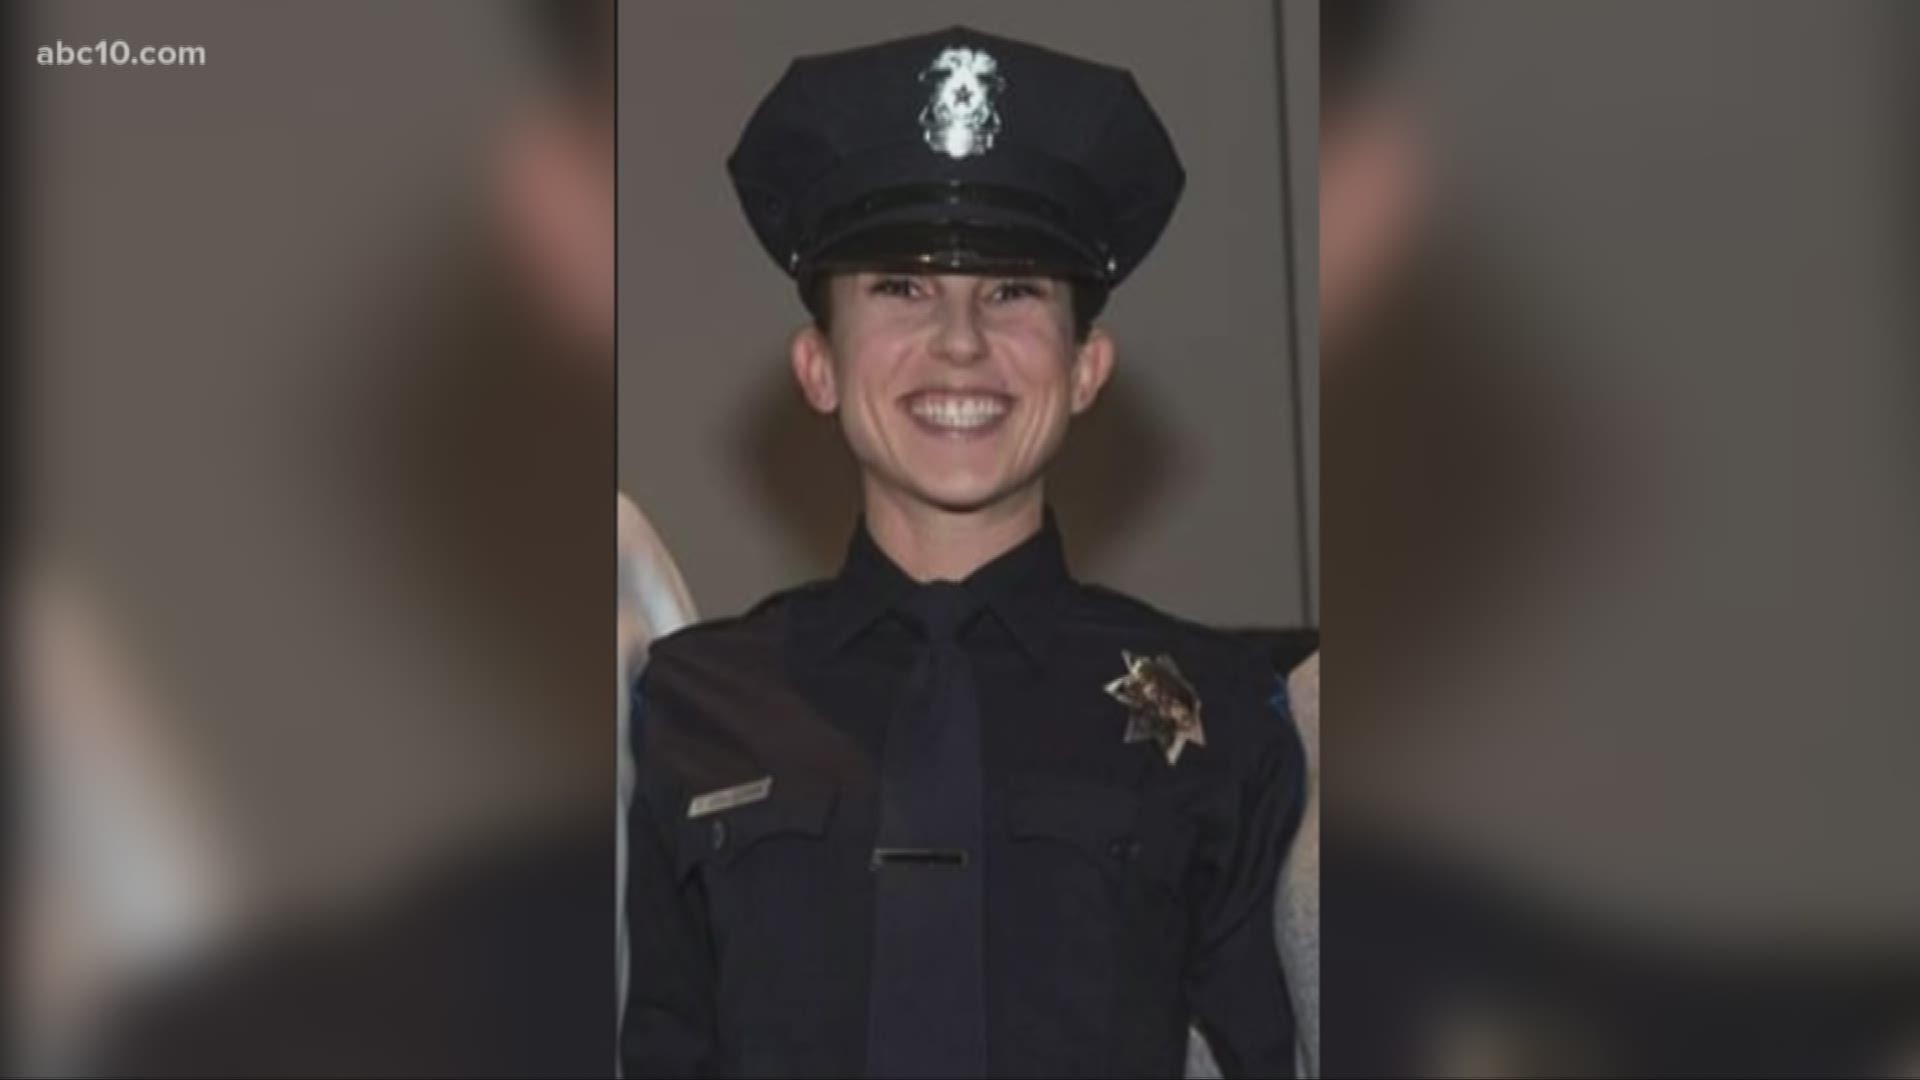 Officers Tara O’Sullivan and Natalie Corona both died in the line of duty, and one Sacramento leader is sending a clear message: They died because they were heroes.